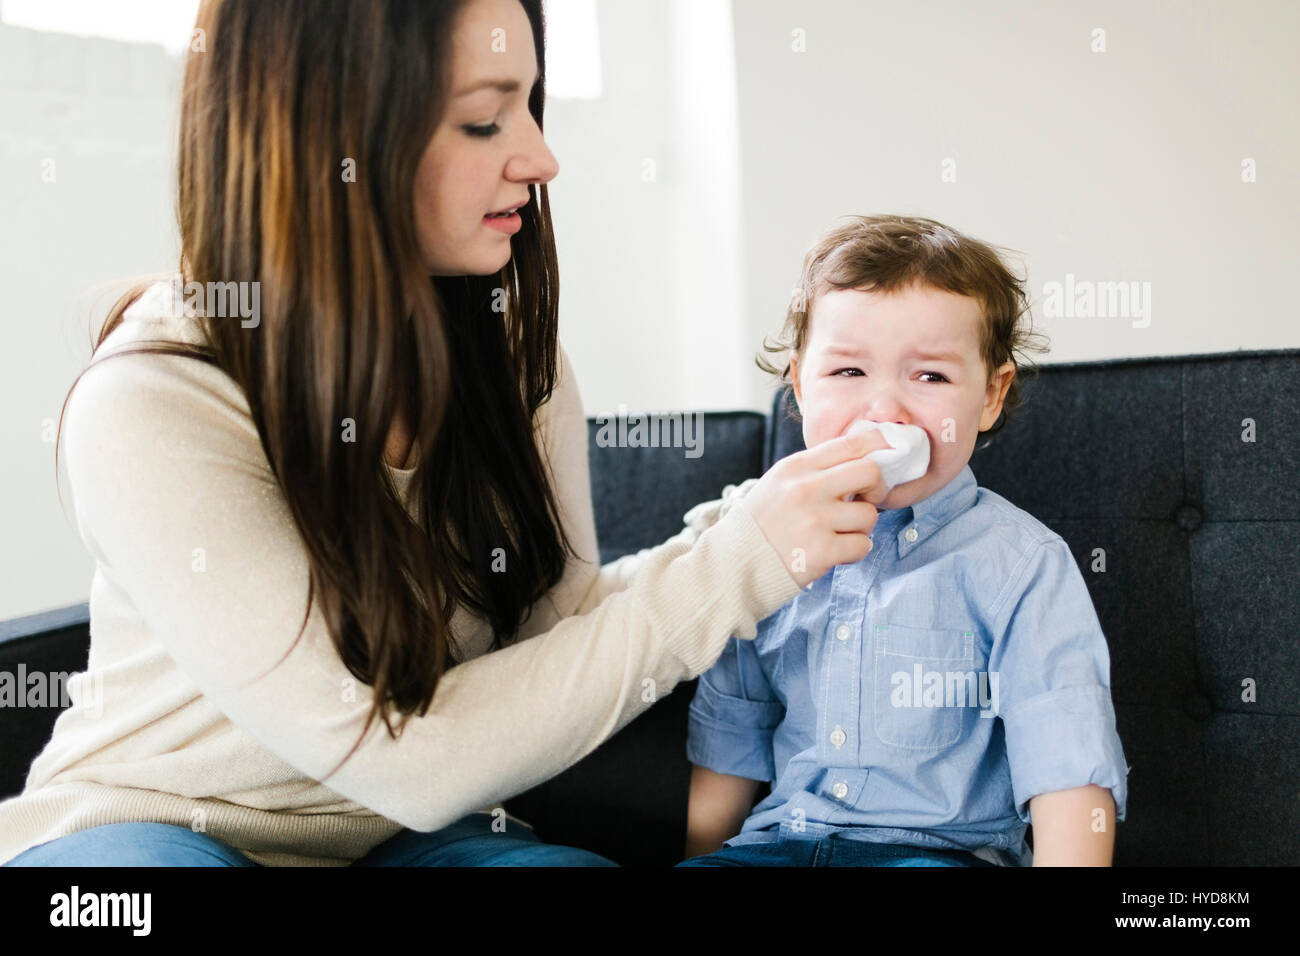 Mother helping son (4-5) blow nose Stock Photo